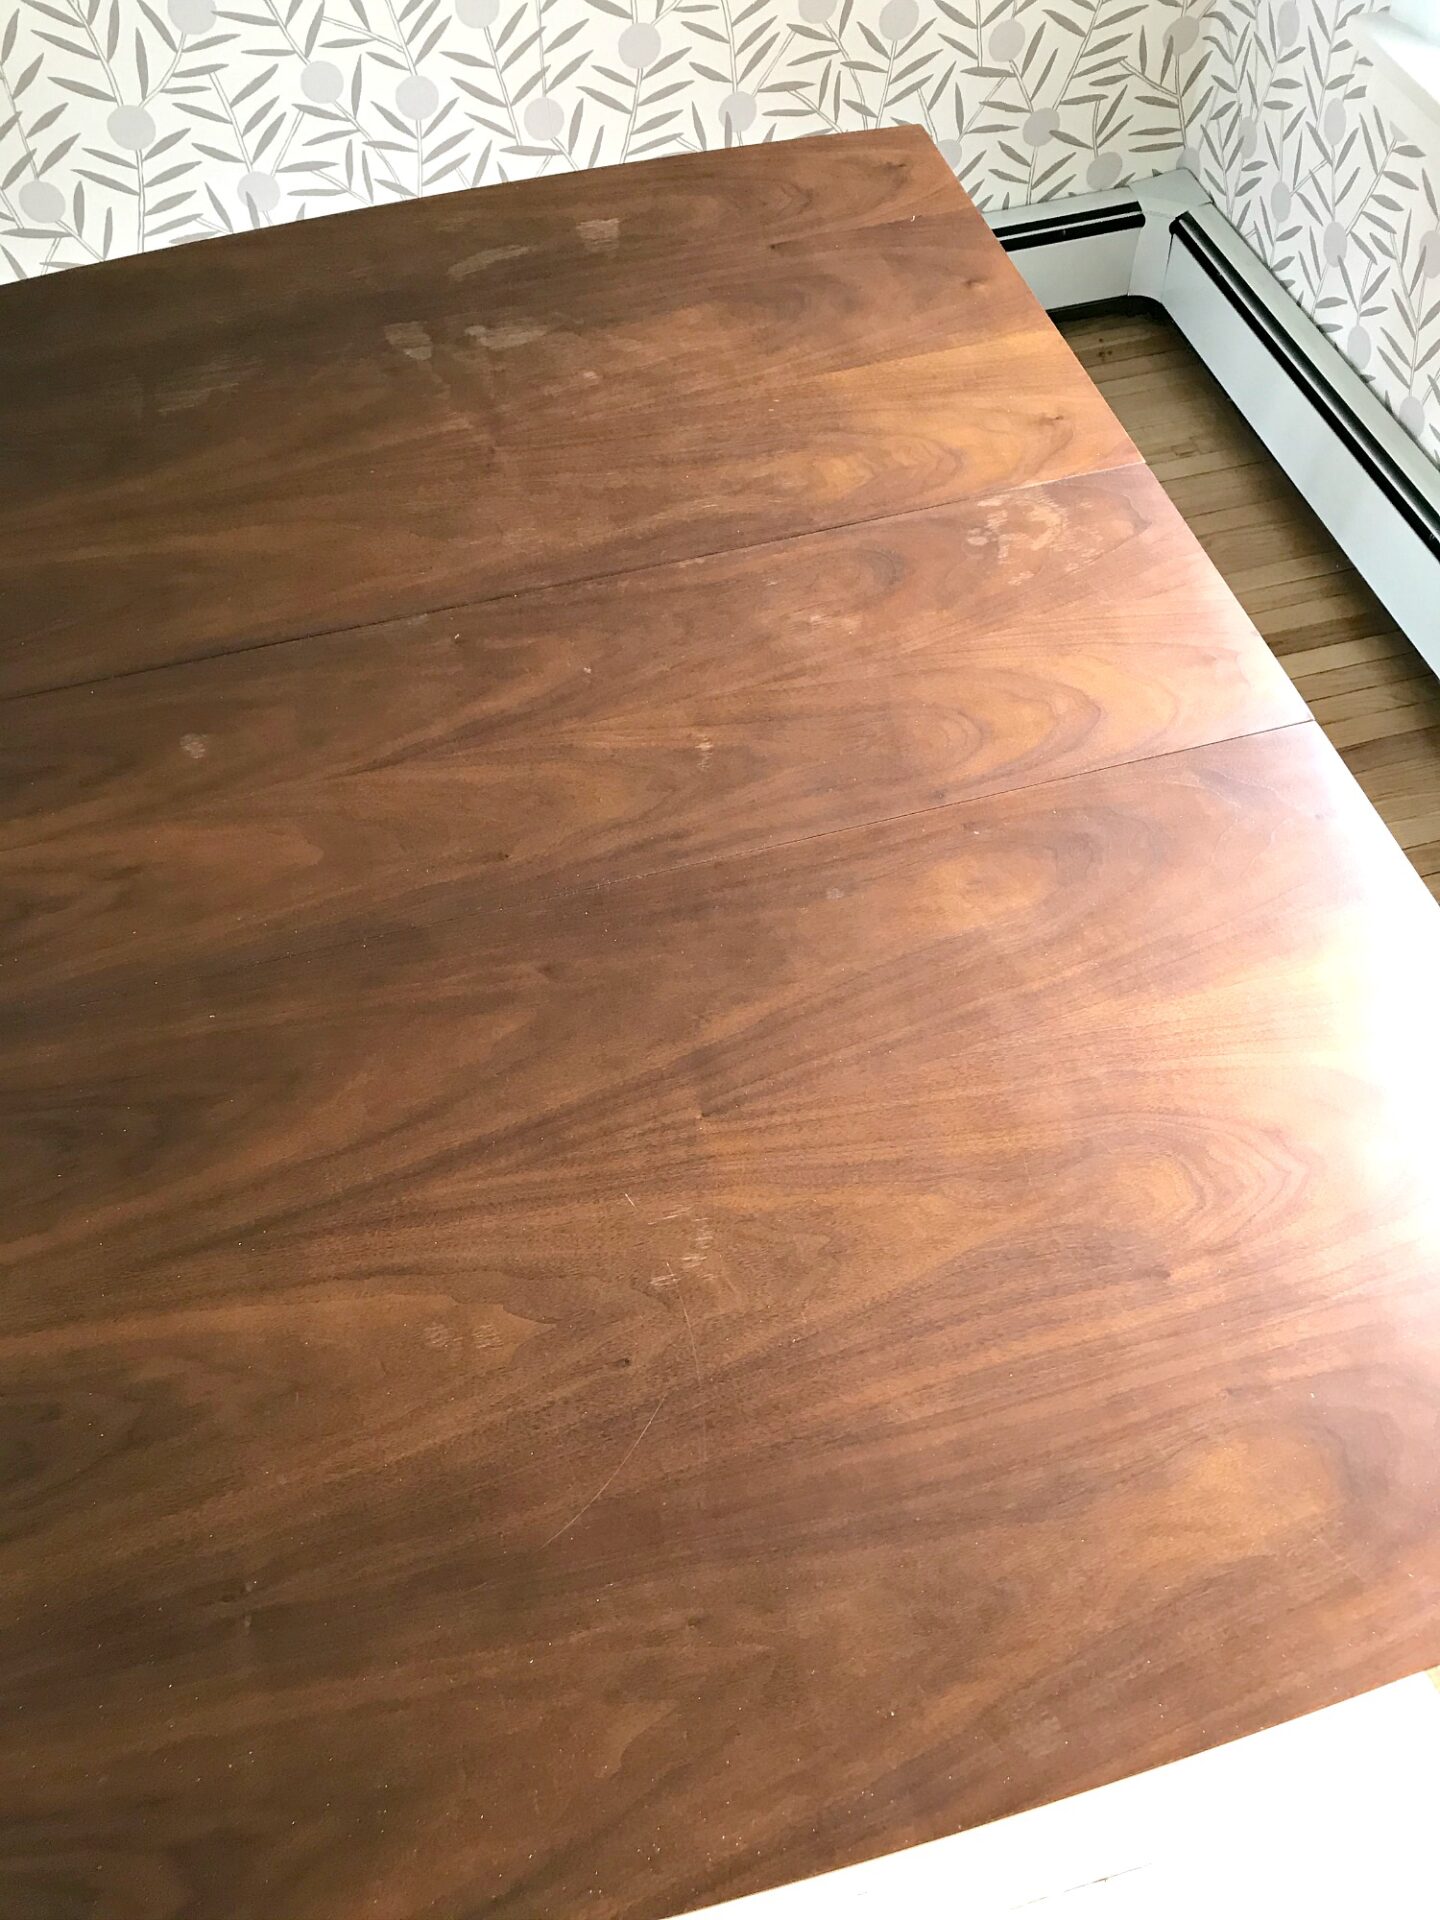 How to quickly refinish wood without sanding